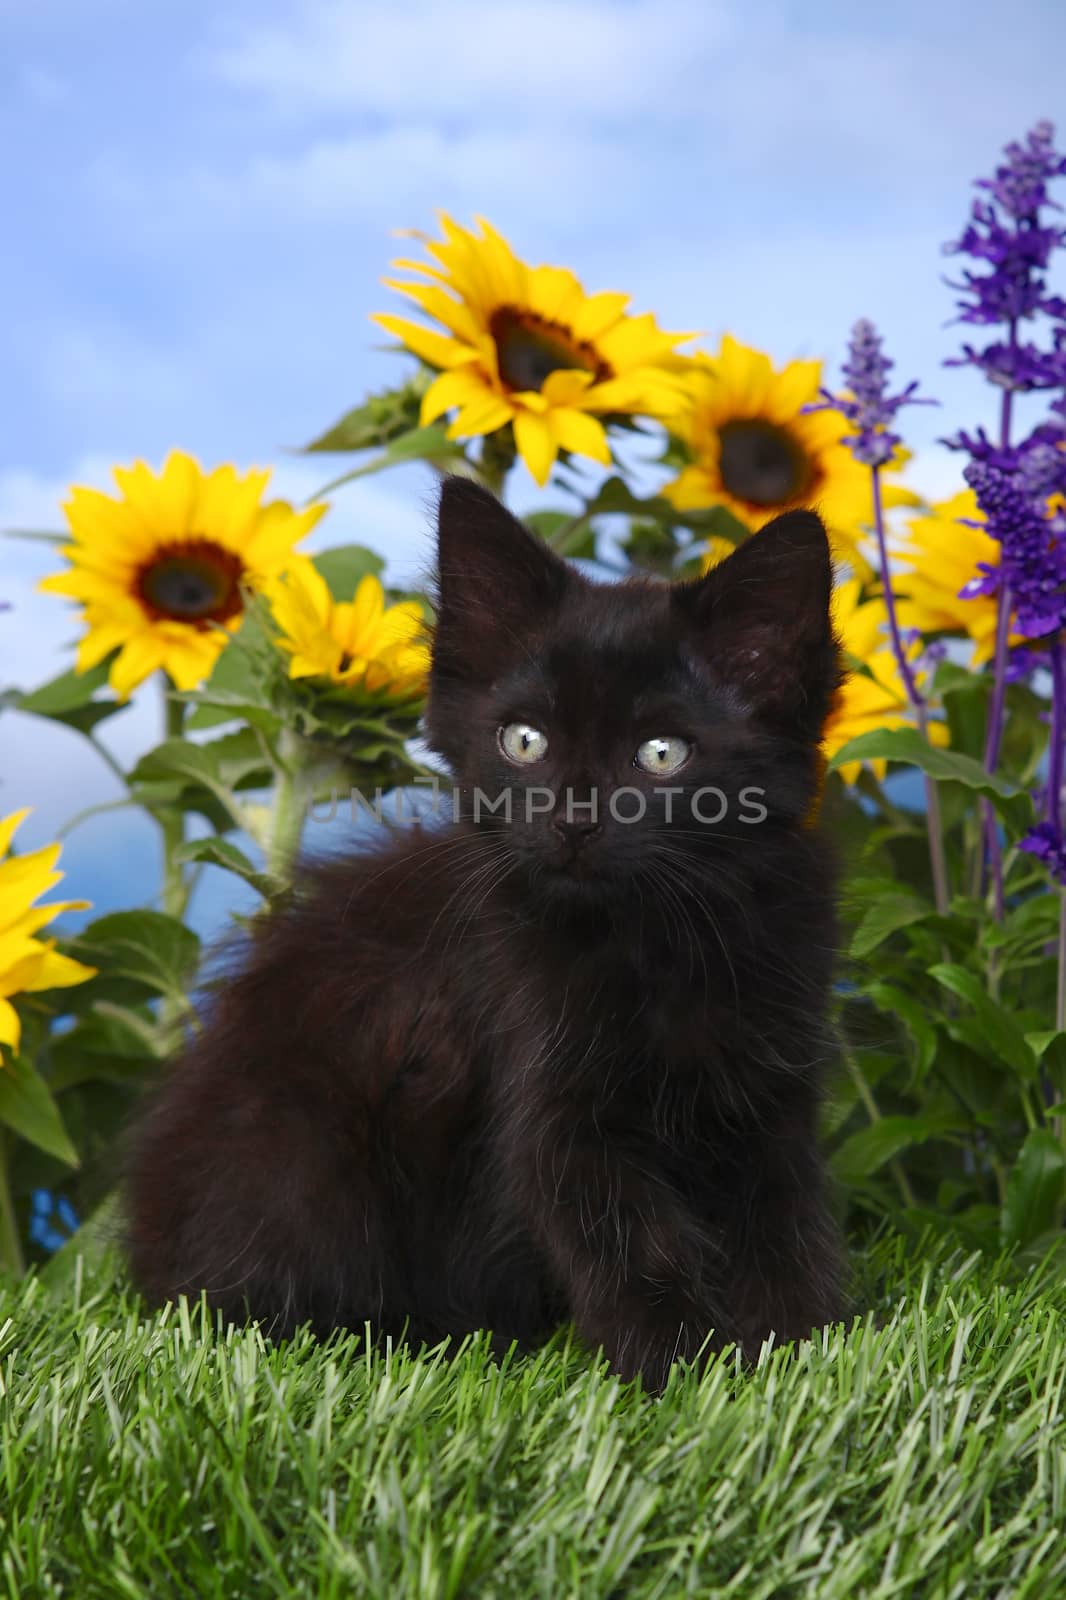 Black Kitten in the Garden With Sunflowers and Salvia